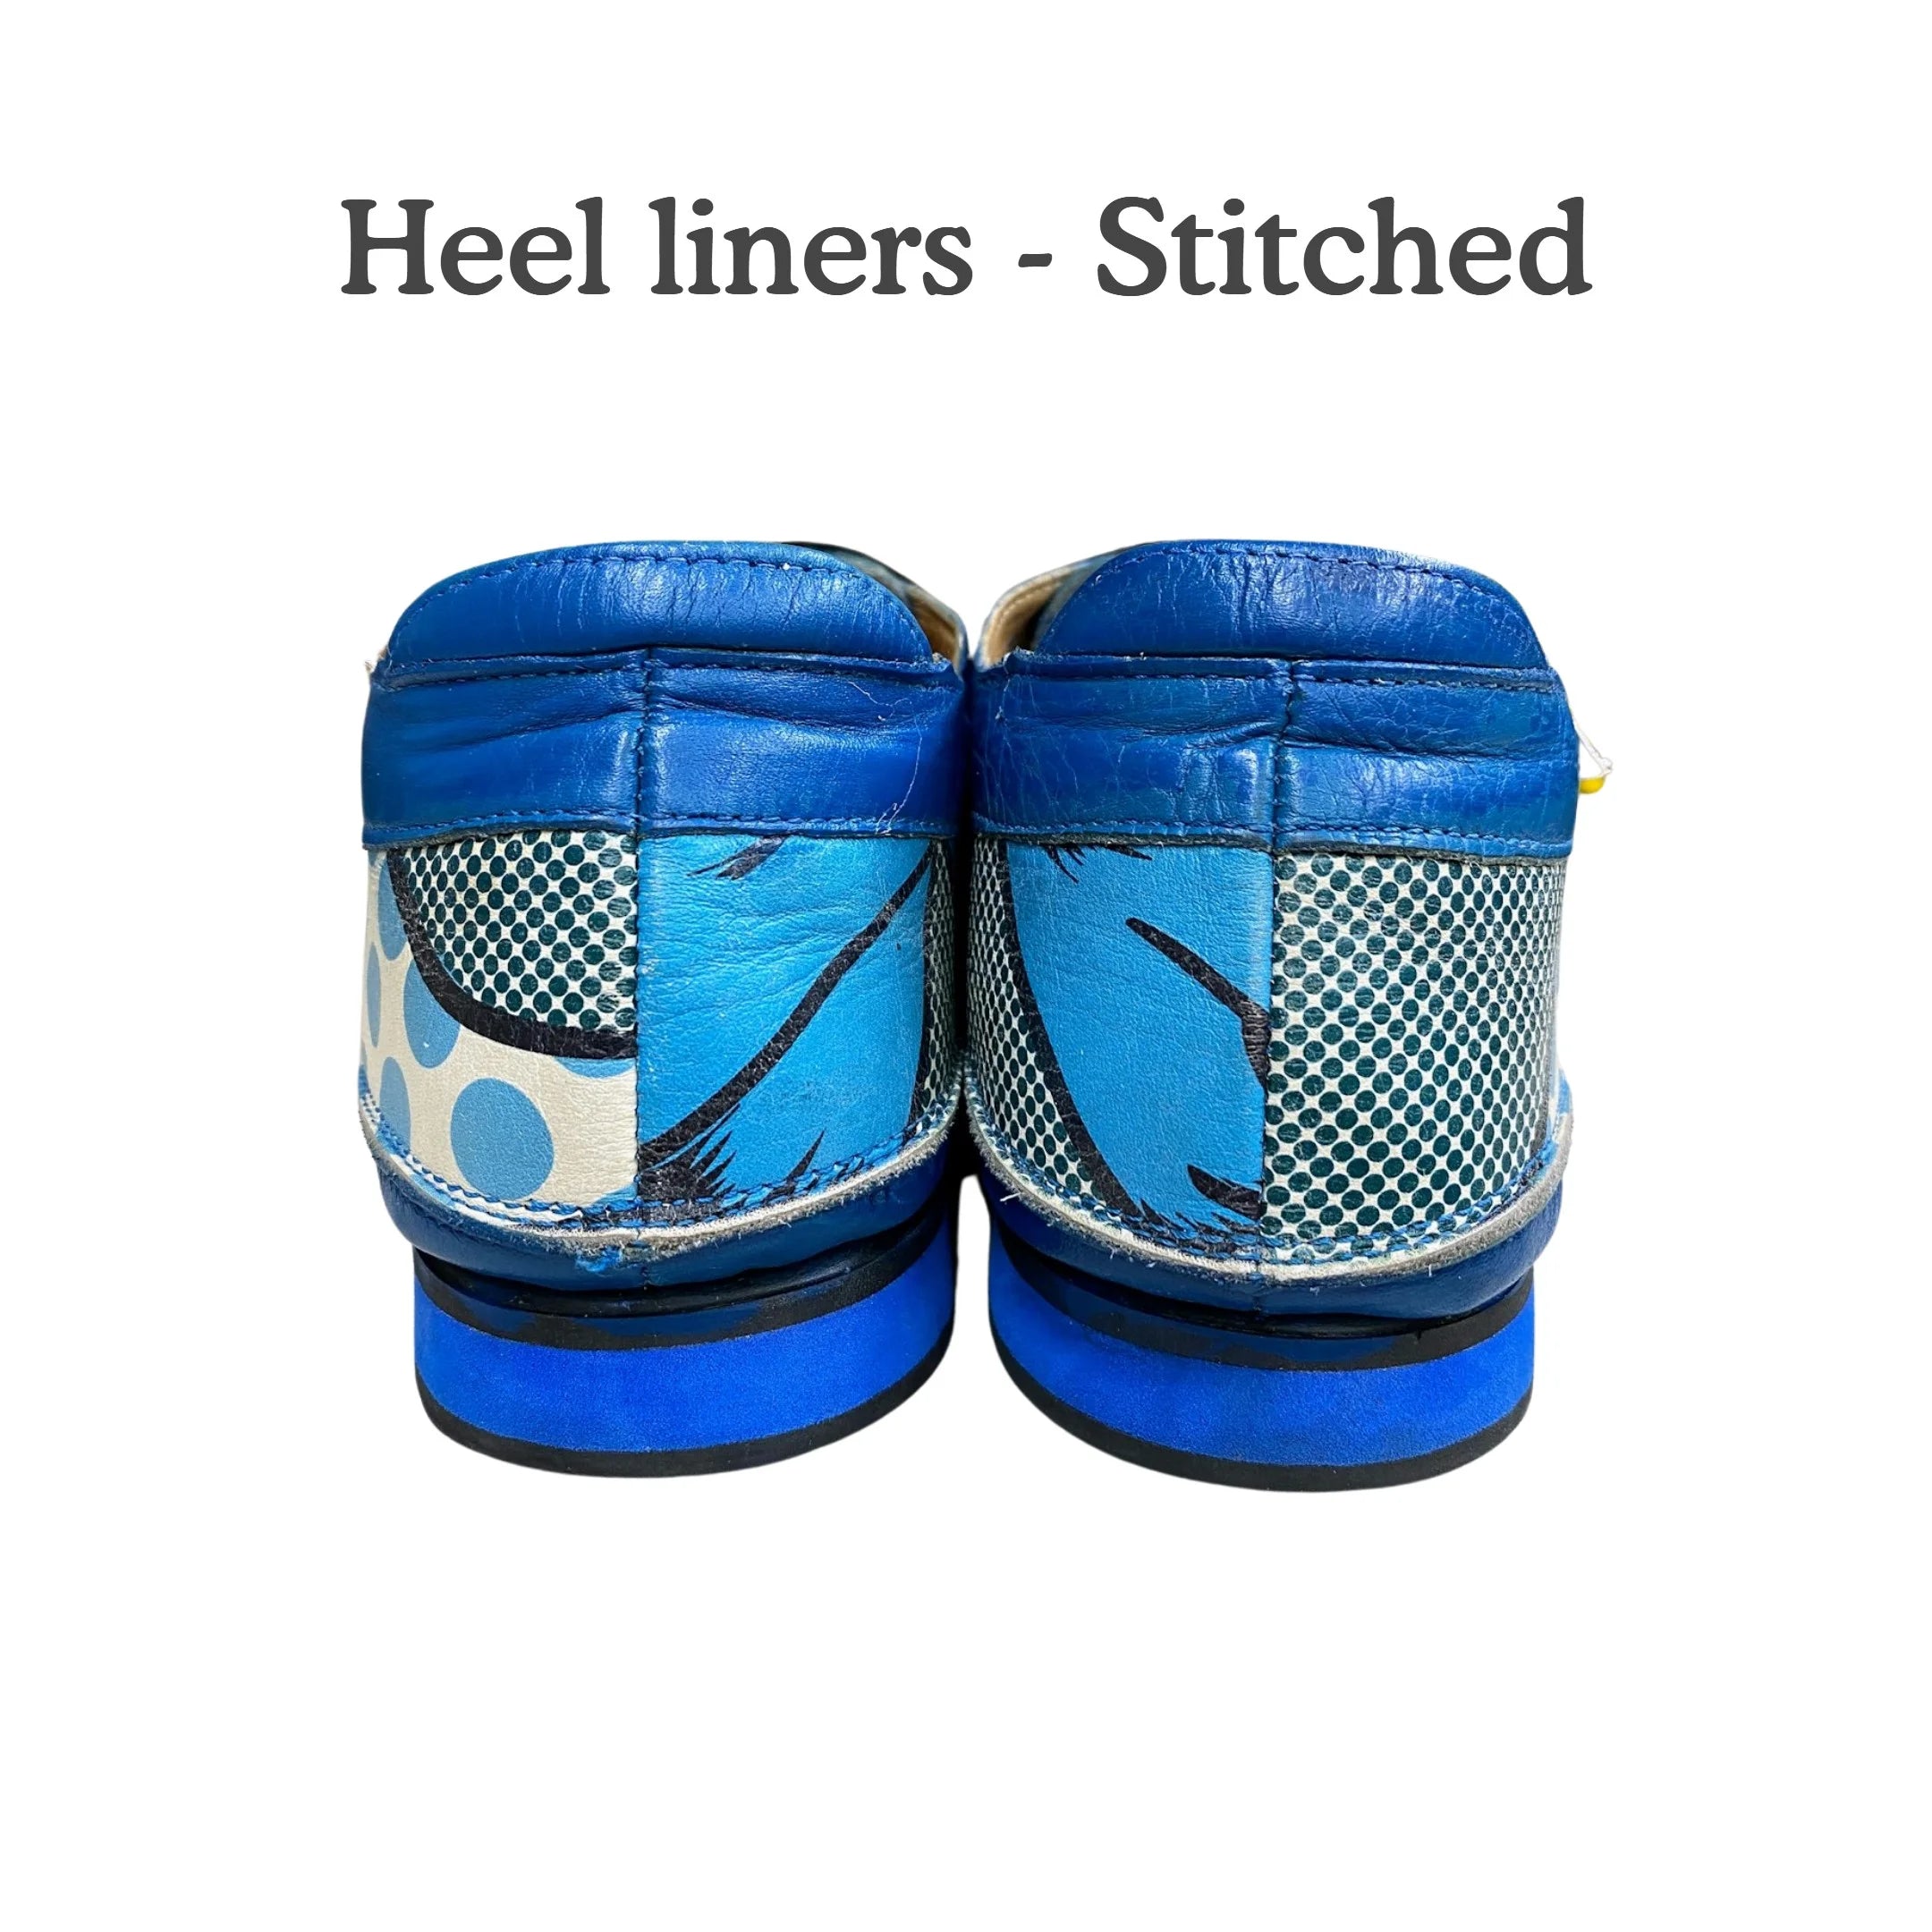 stitched-heel-liners-fabric-leather-blue-shoes